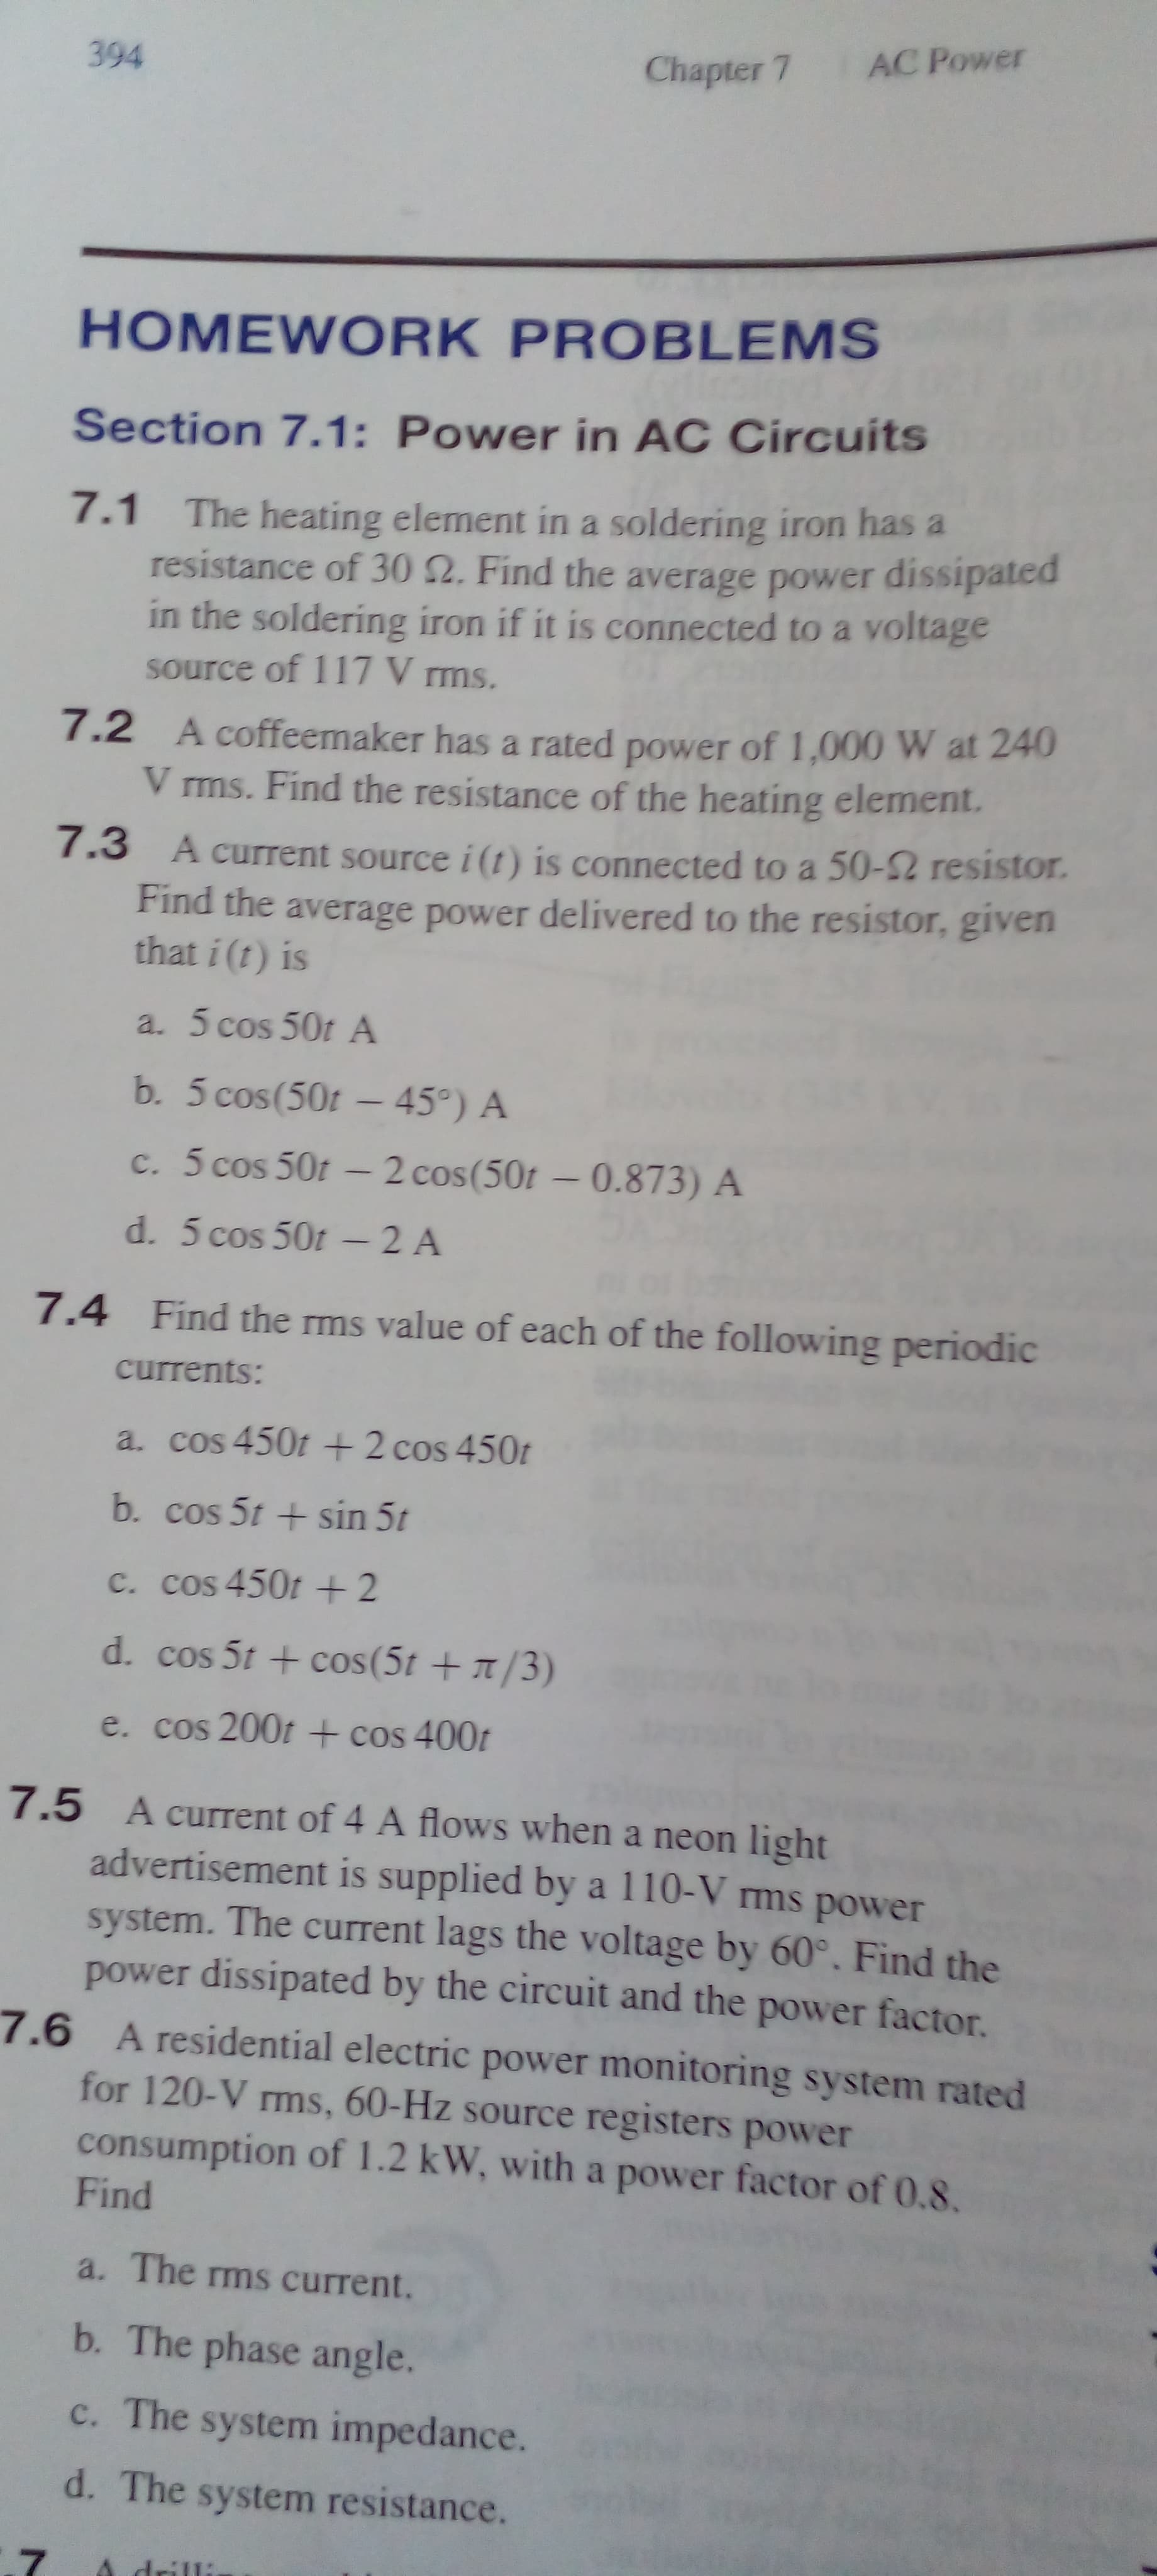 394
Chapter 7 AC Power
HOMEWORK PROBLEMS
Section 7.1: Power in AC Circuits
7.1 The heating element in a soldering iron has a
resistance of 30 2. Find the average power dissipated
in the soldering iron if it is connected to a voltage
source of 117 V rms.
7.2 A coffeemaker has a rated power of 1,000 W at 240
V ms. Find the resistance of the heating element.
7.3 A current source i (t) is connected to a 50-2 resistor.
Find the average power delivered to the resistor, given
that i (t) is
a. 5 cos 50t A
b. 5 cos(50t - 45°) A
c. 5 cos 50t - 2 cos(50t - 0.873) A
d. 5 cos 50t -2 A
7.4 Find the rms value of each of the following periodic
currents:
a. cos 450t +2 cos 450t
b. cos 5t + sin 5t
c. cos 450t + 2
d. cos 5t + cos(5t +/3)
e. cos 200t + cos 400t
7.5 A current of 4 A flows when a neon light
advertisement is supplied by a 110-V ms power
system. The current lags the voltage by 60°. Find the
power dissipated by the circuit and the power factor.
7.6 A residential electric power monitoring system rated
for 120-V rms, 60-Hz source registers power
consumption of 1.2 kW, with a power factor of 0.8.
Find
a. The ms current.
b. The phase angle.
c. The system impedance.
d. The system resistance.
